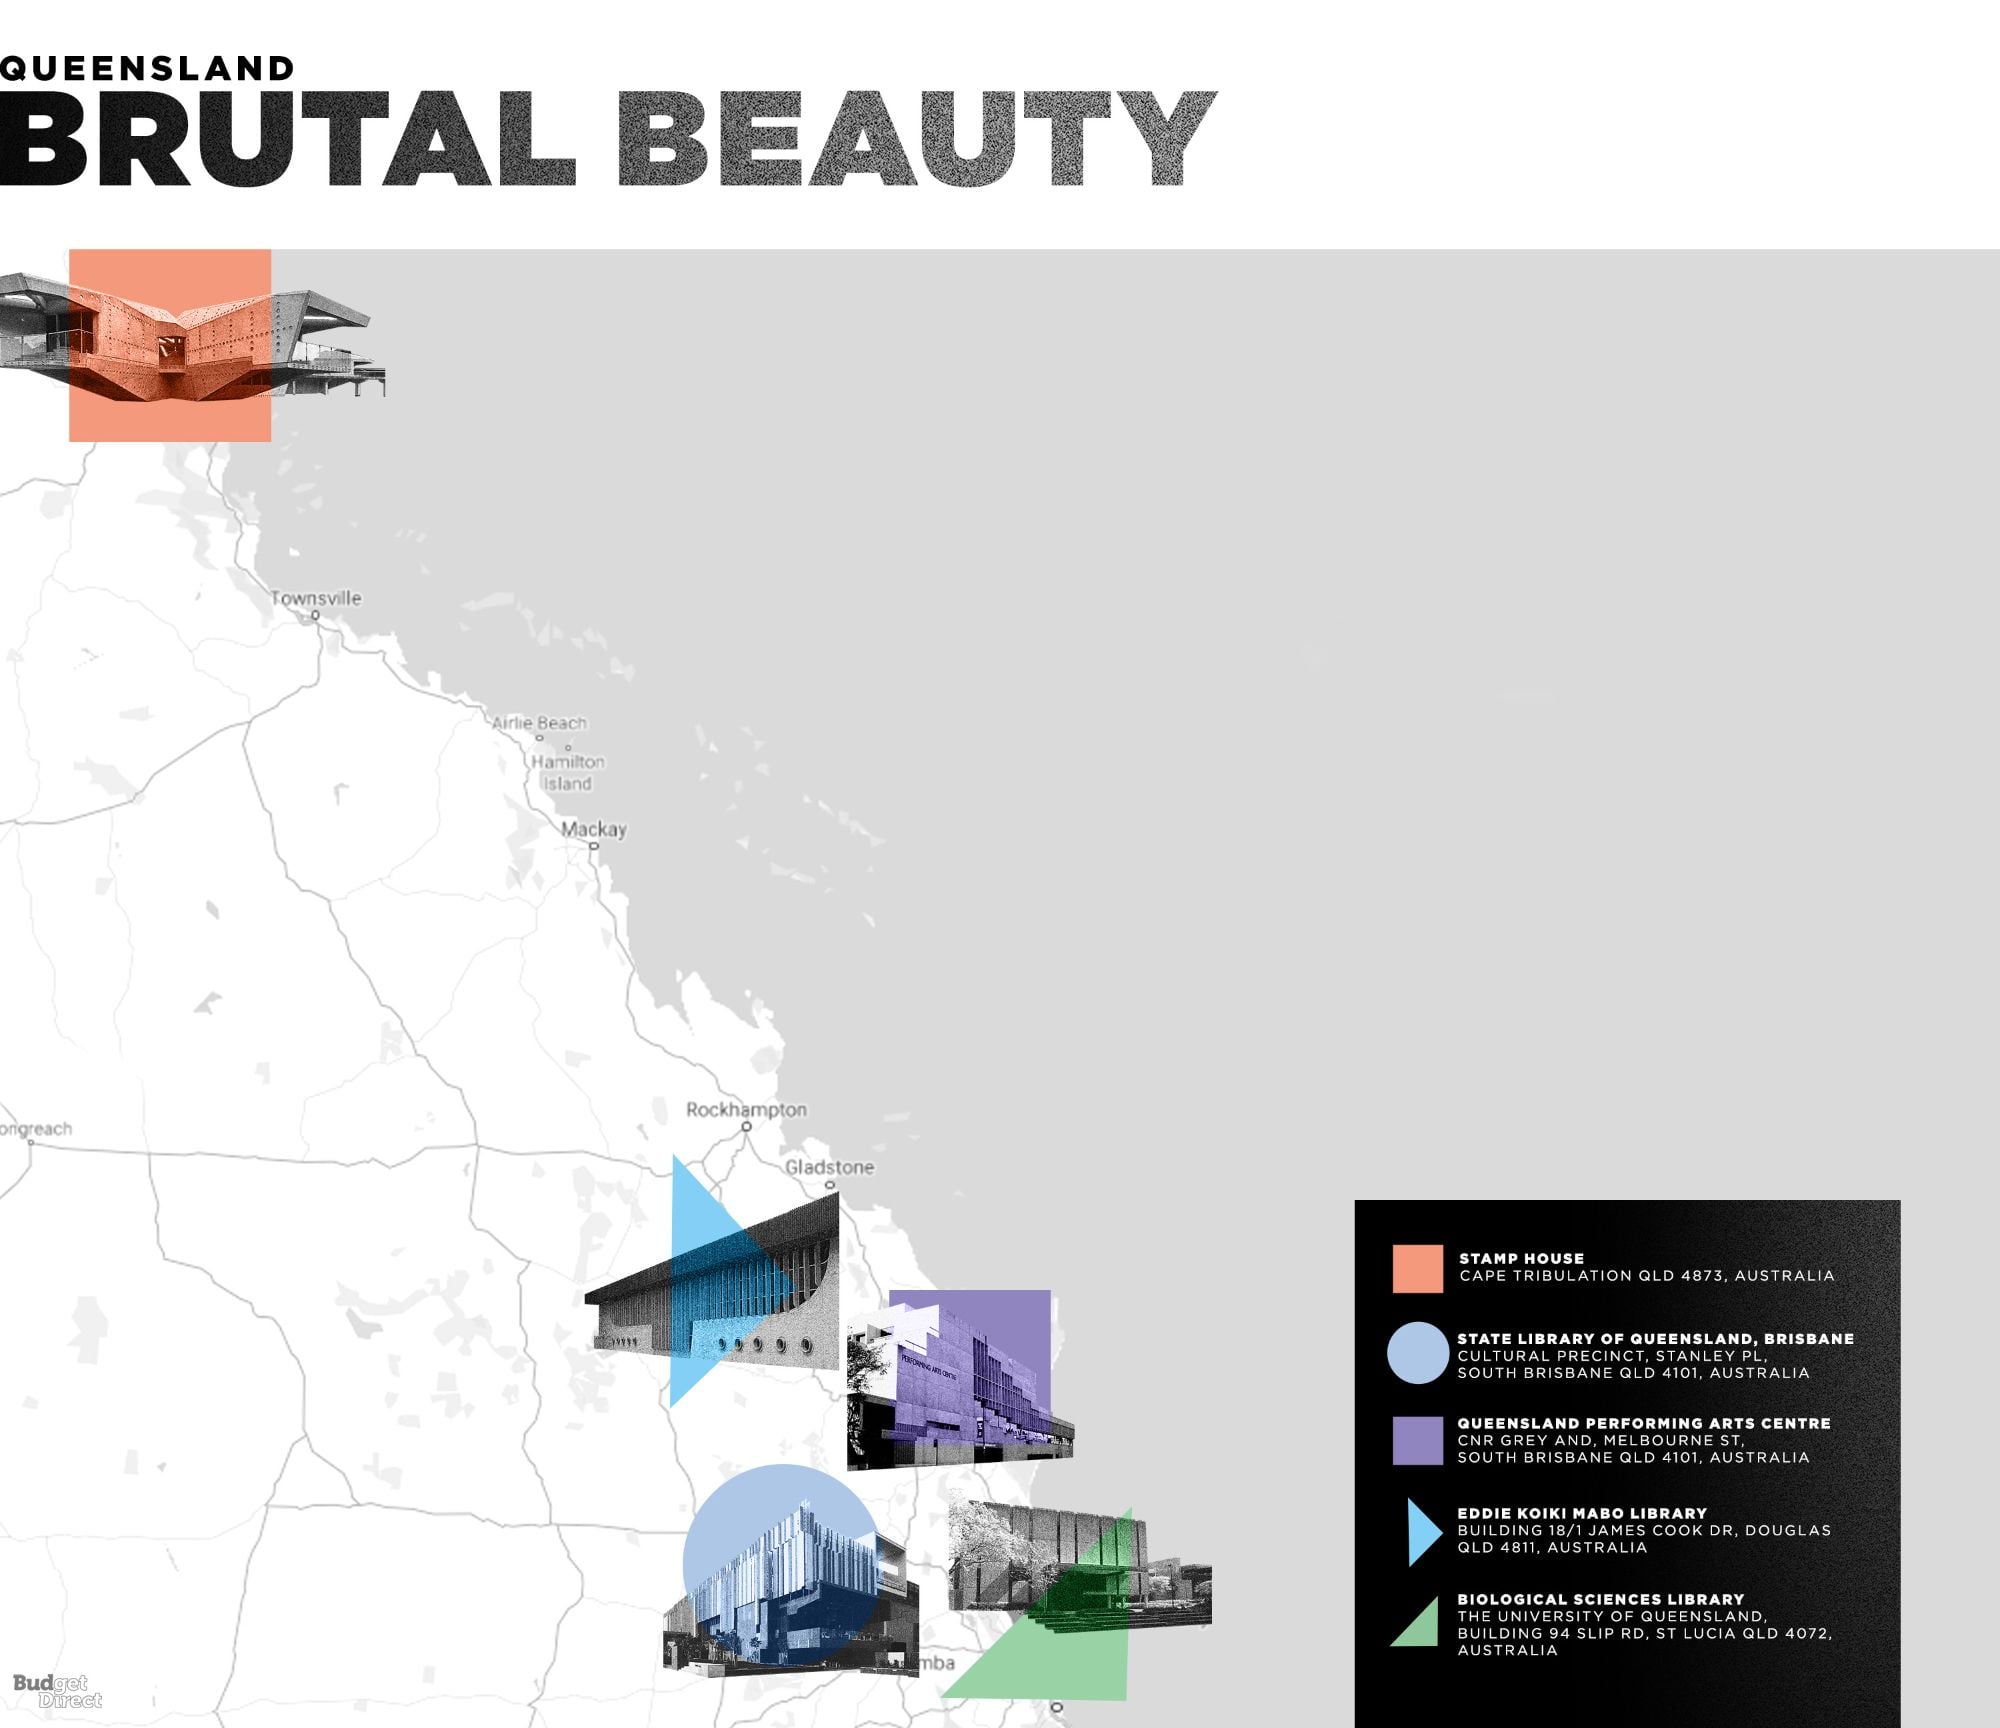 Map shows all the buildings from Australia's Queensland region featured in Budget Direct Travel Insurance's tribute to Aussie Brutalism.